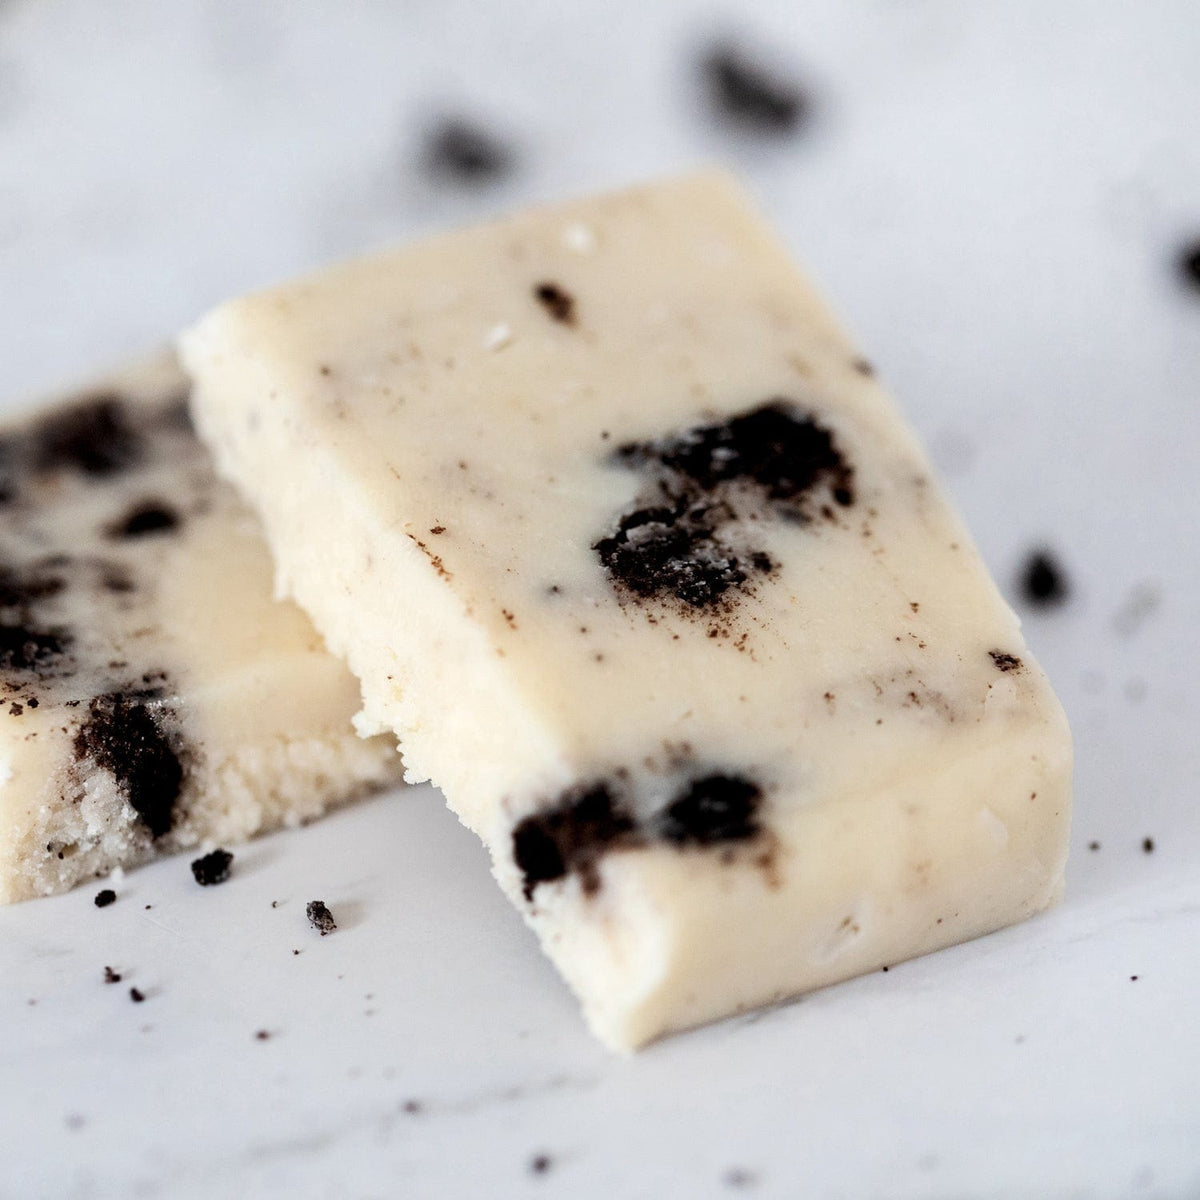 Lolli and Pops L&amp;P Collection Cookies and Cream Fudge